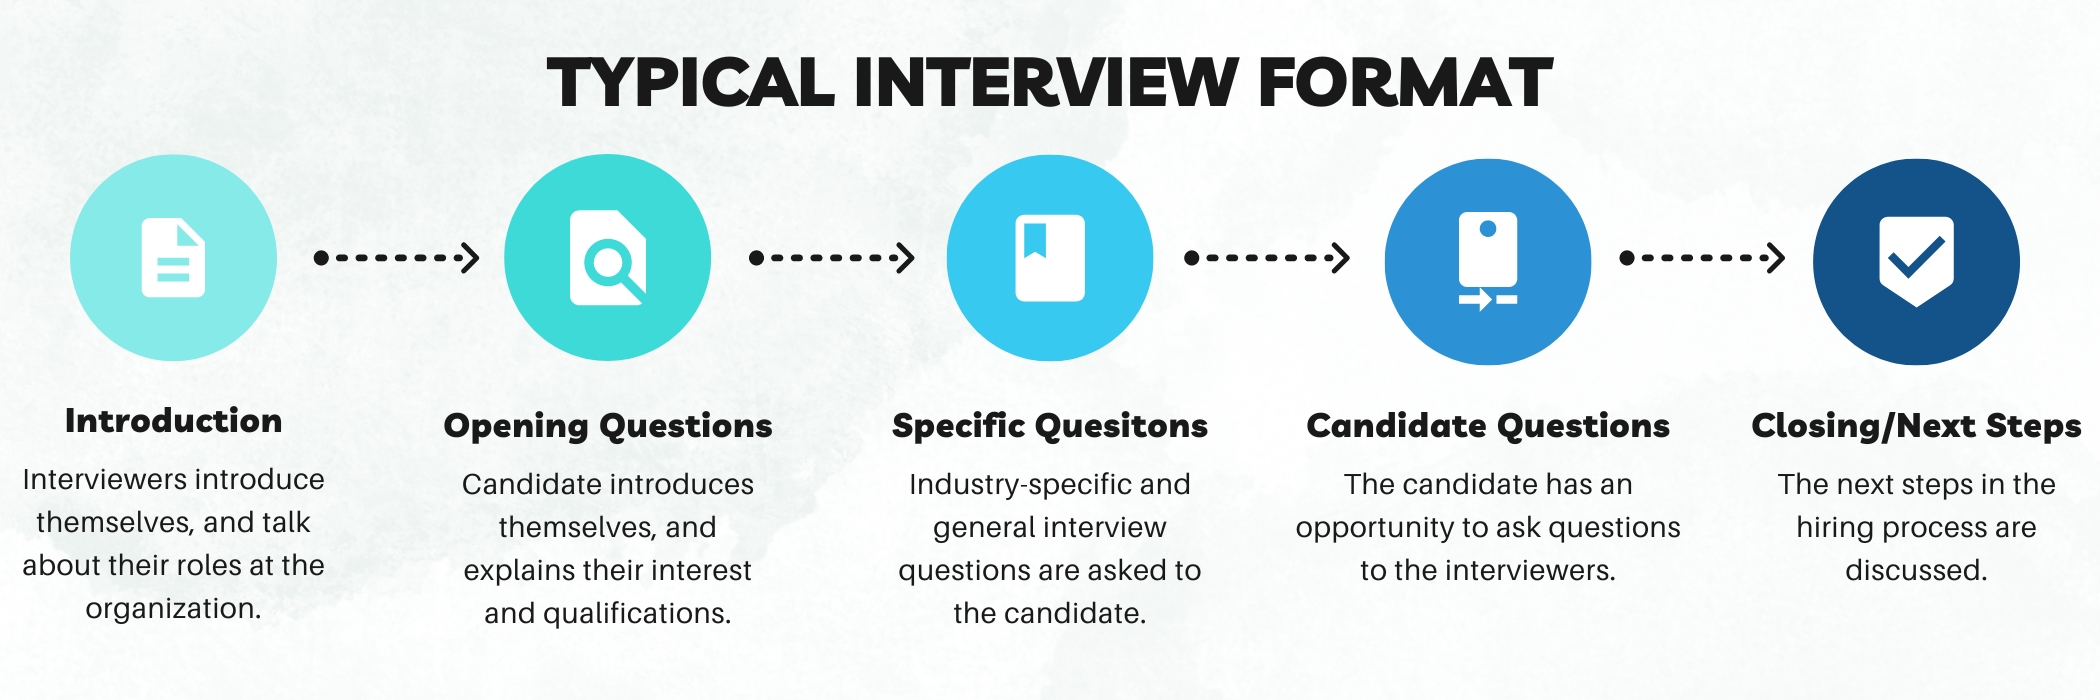 Basic Interview Questions To Ask Candidates